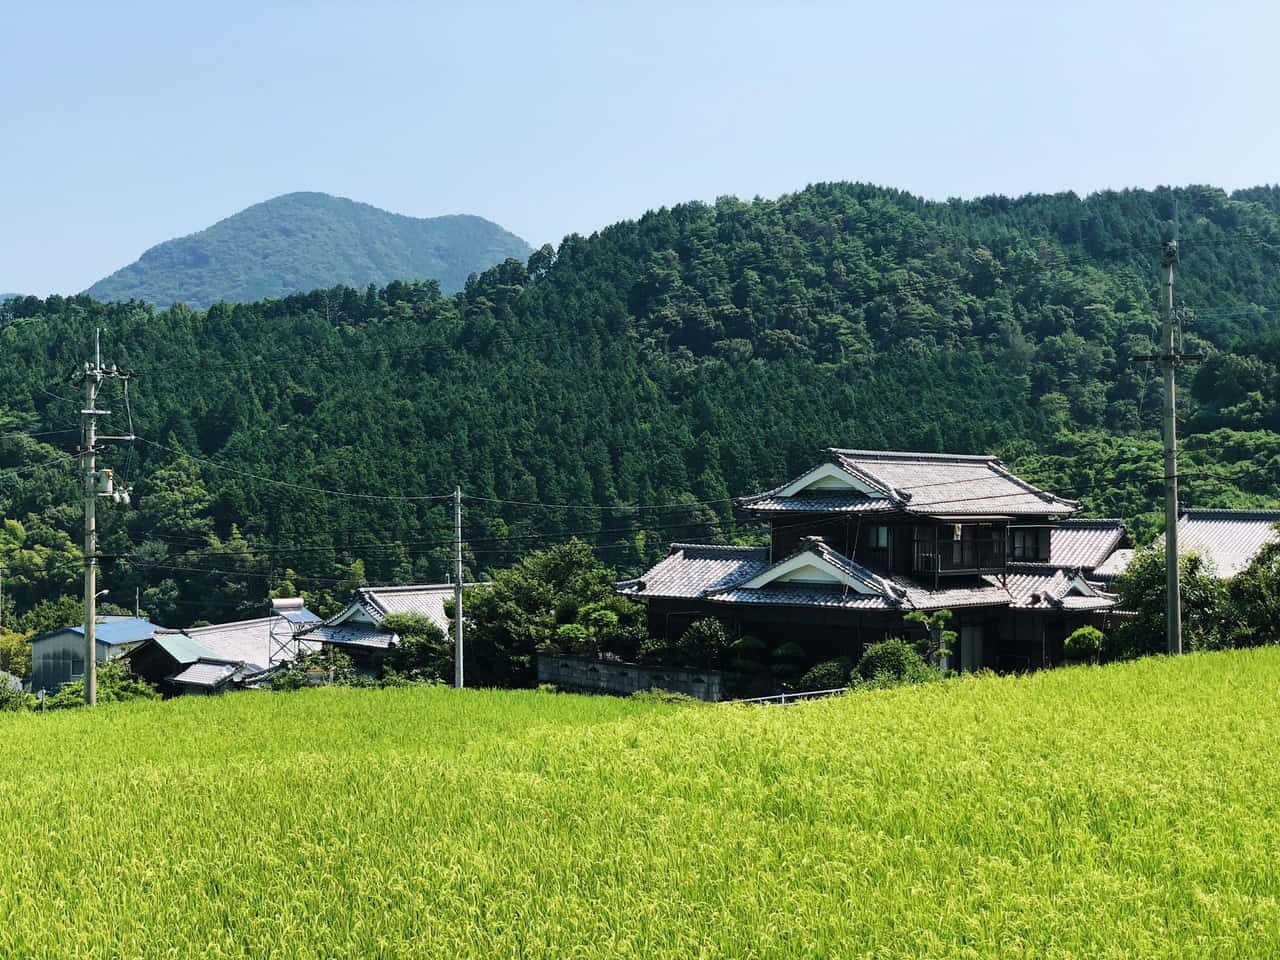 a view of rice fields, mountains, and houses in japan